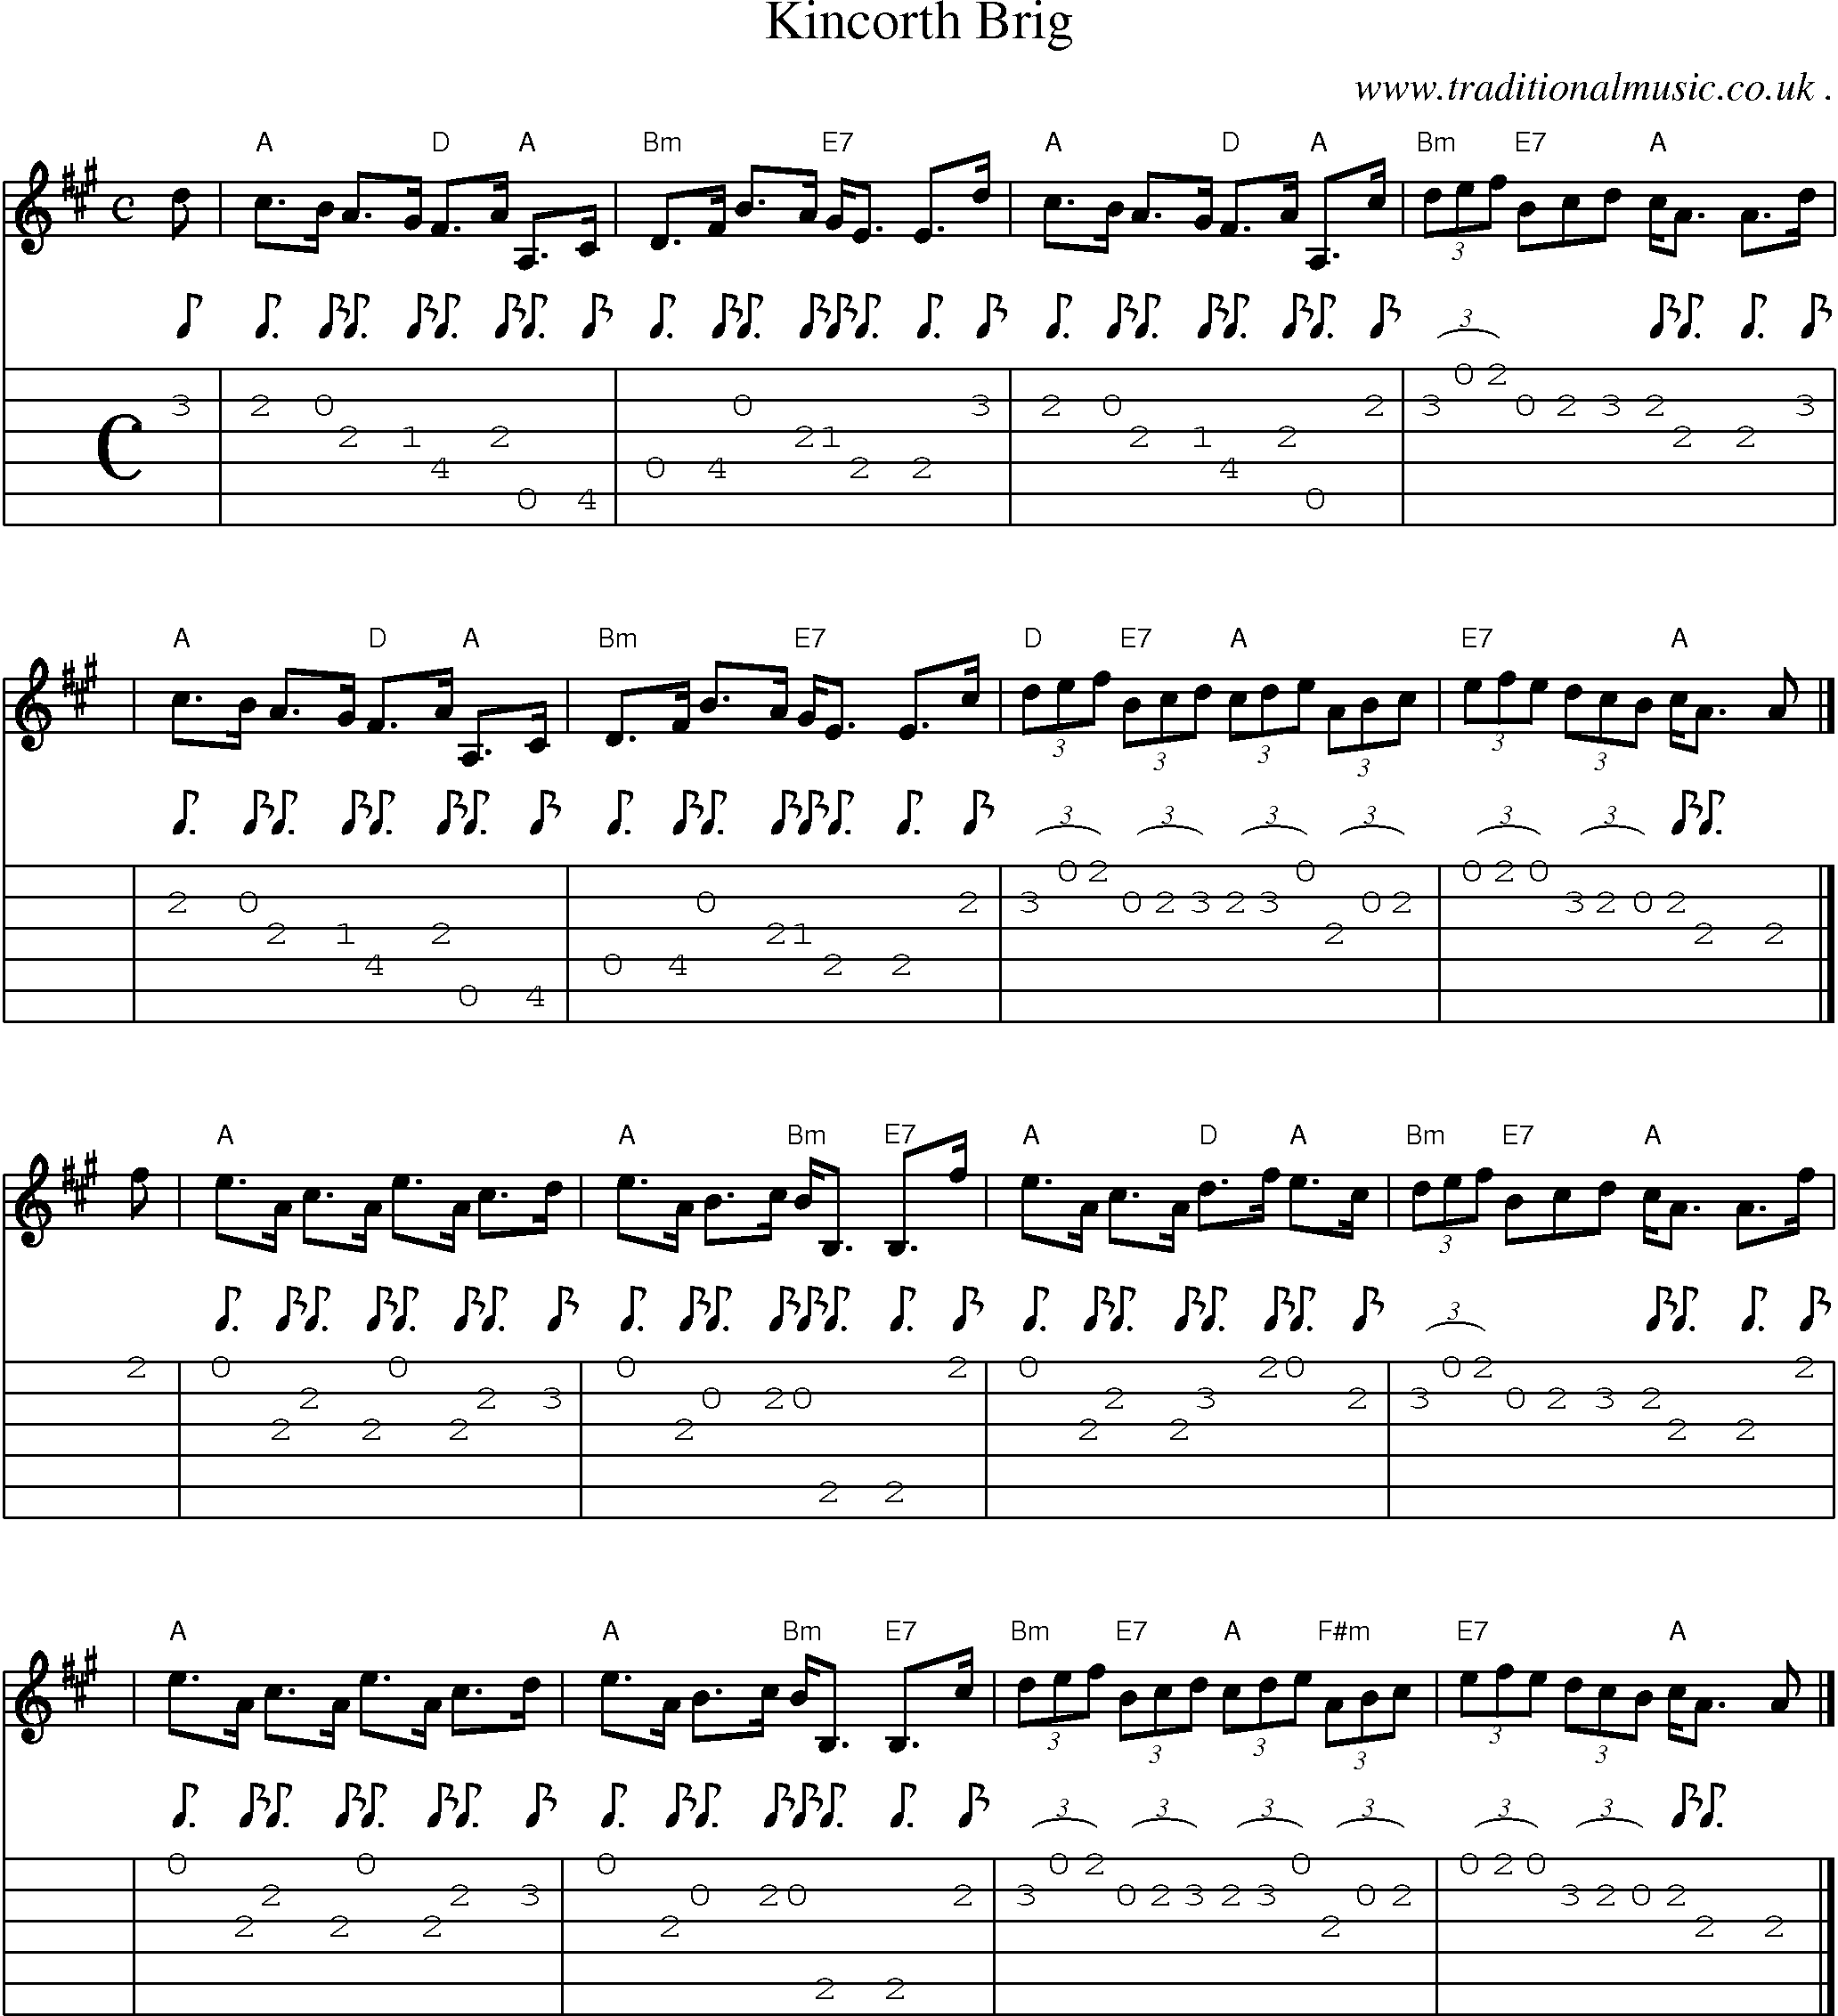 Sheet-music  score, Chords and Guitar Tabs for Kincorth Brig